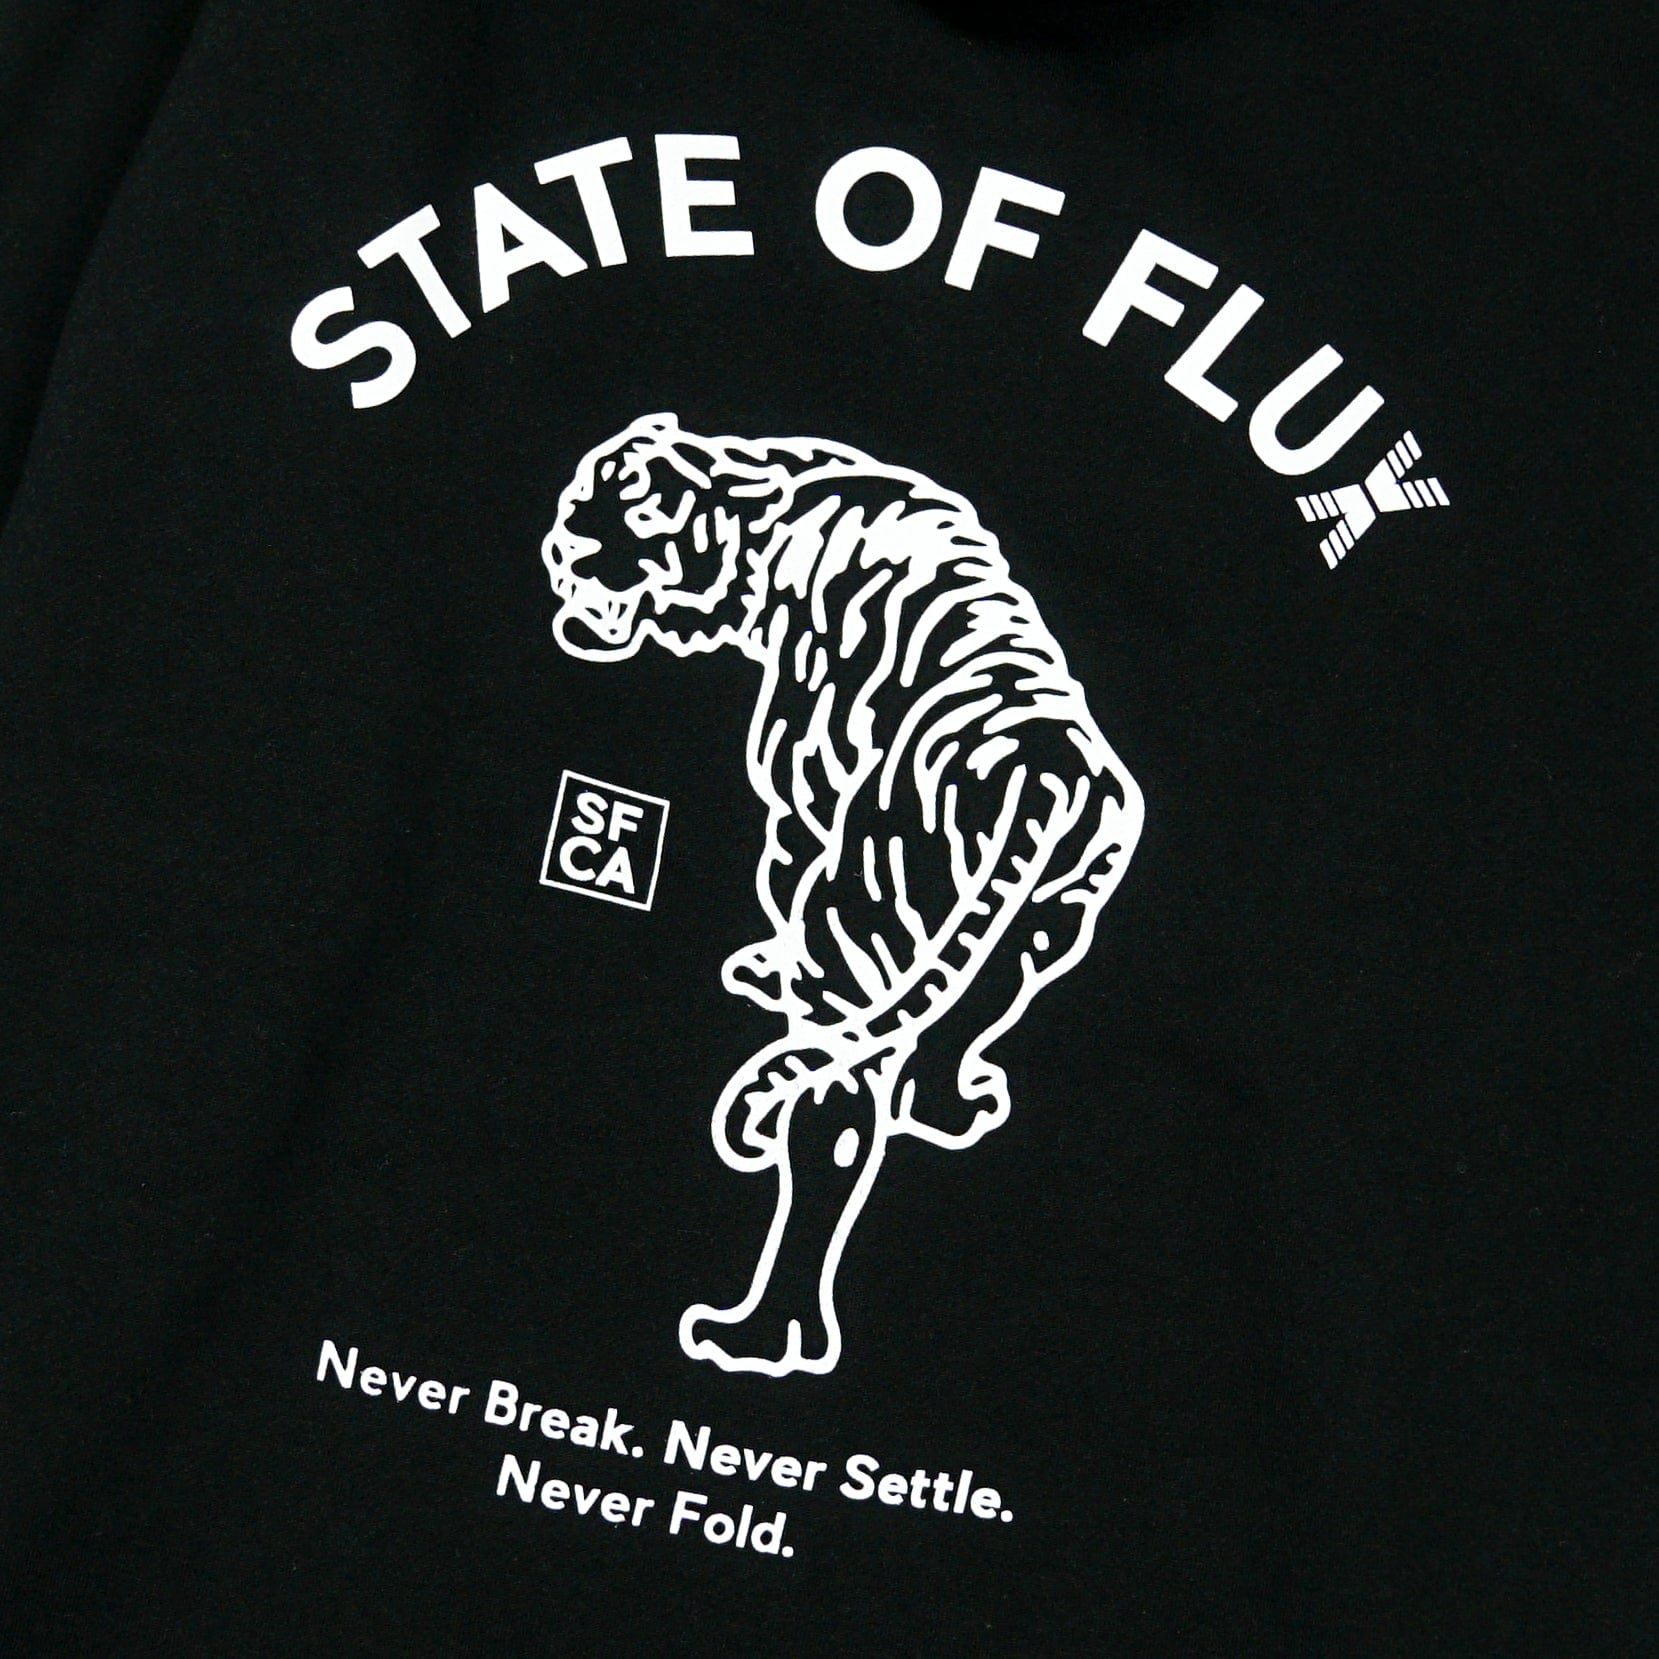 Prowler Hoodie in black and white - State Of Flux - State Of Flux